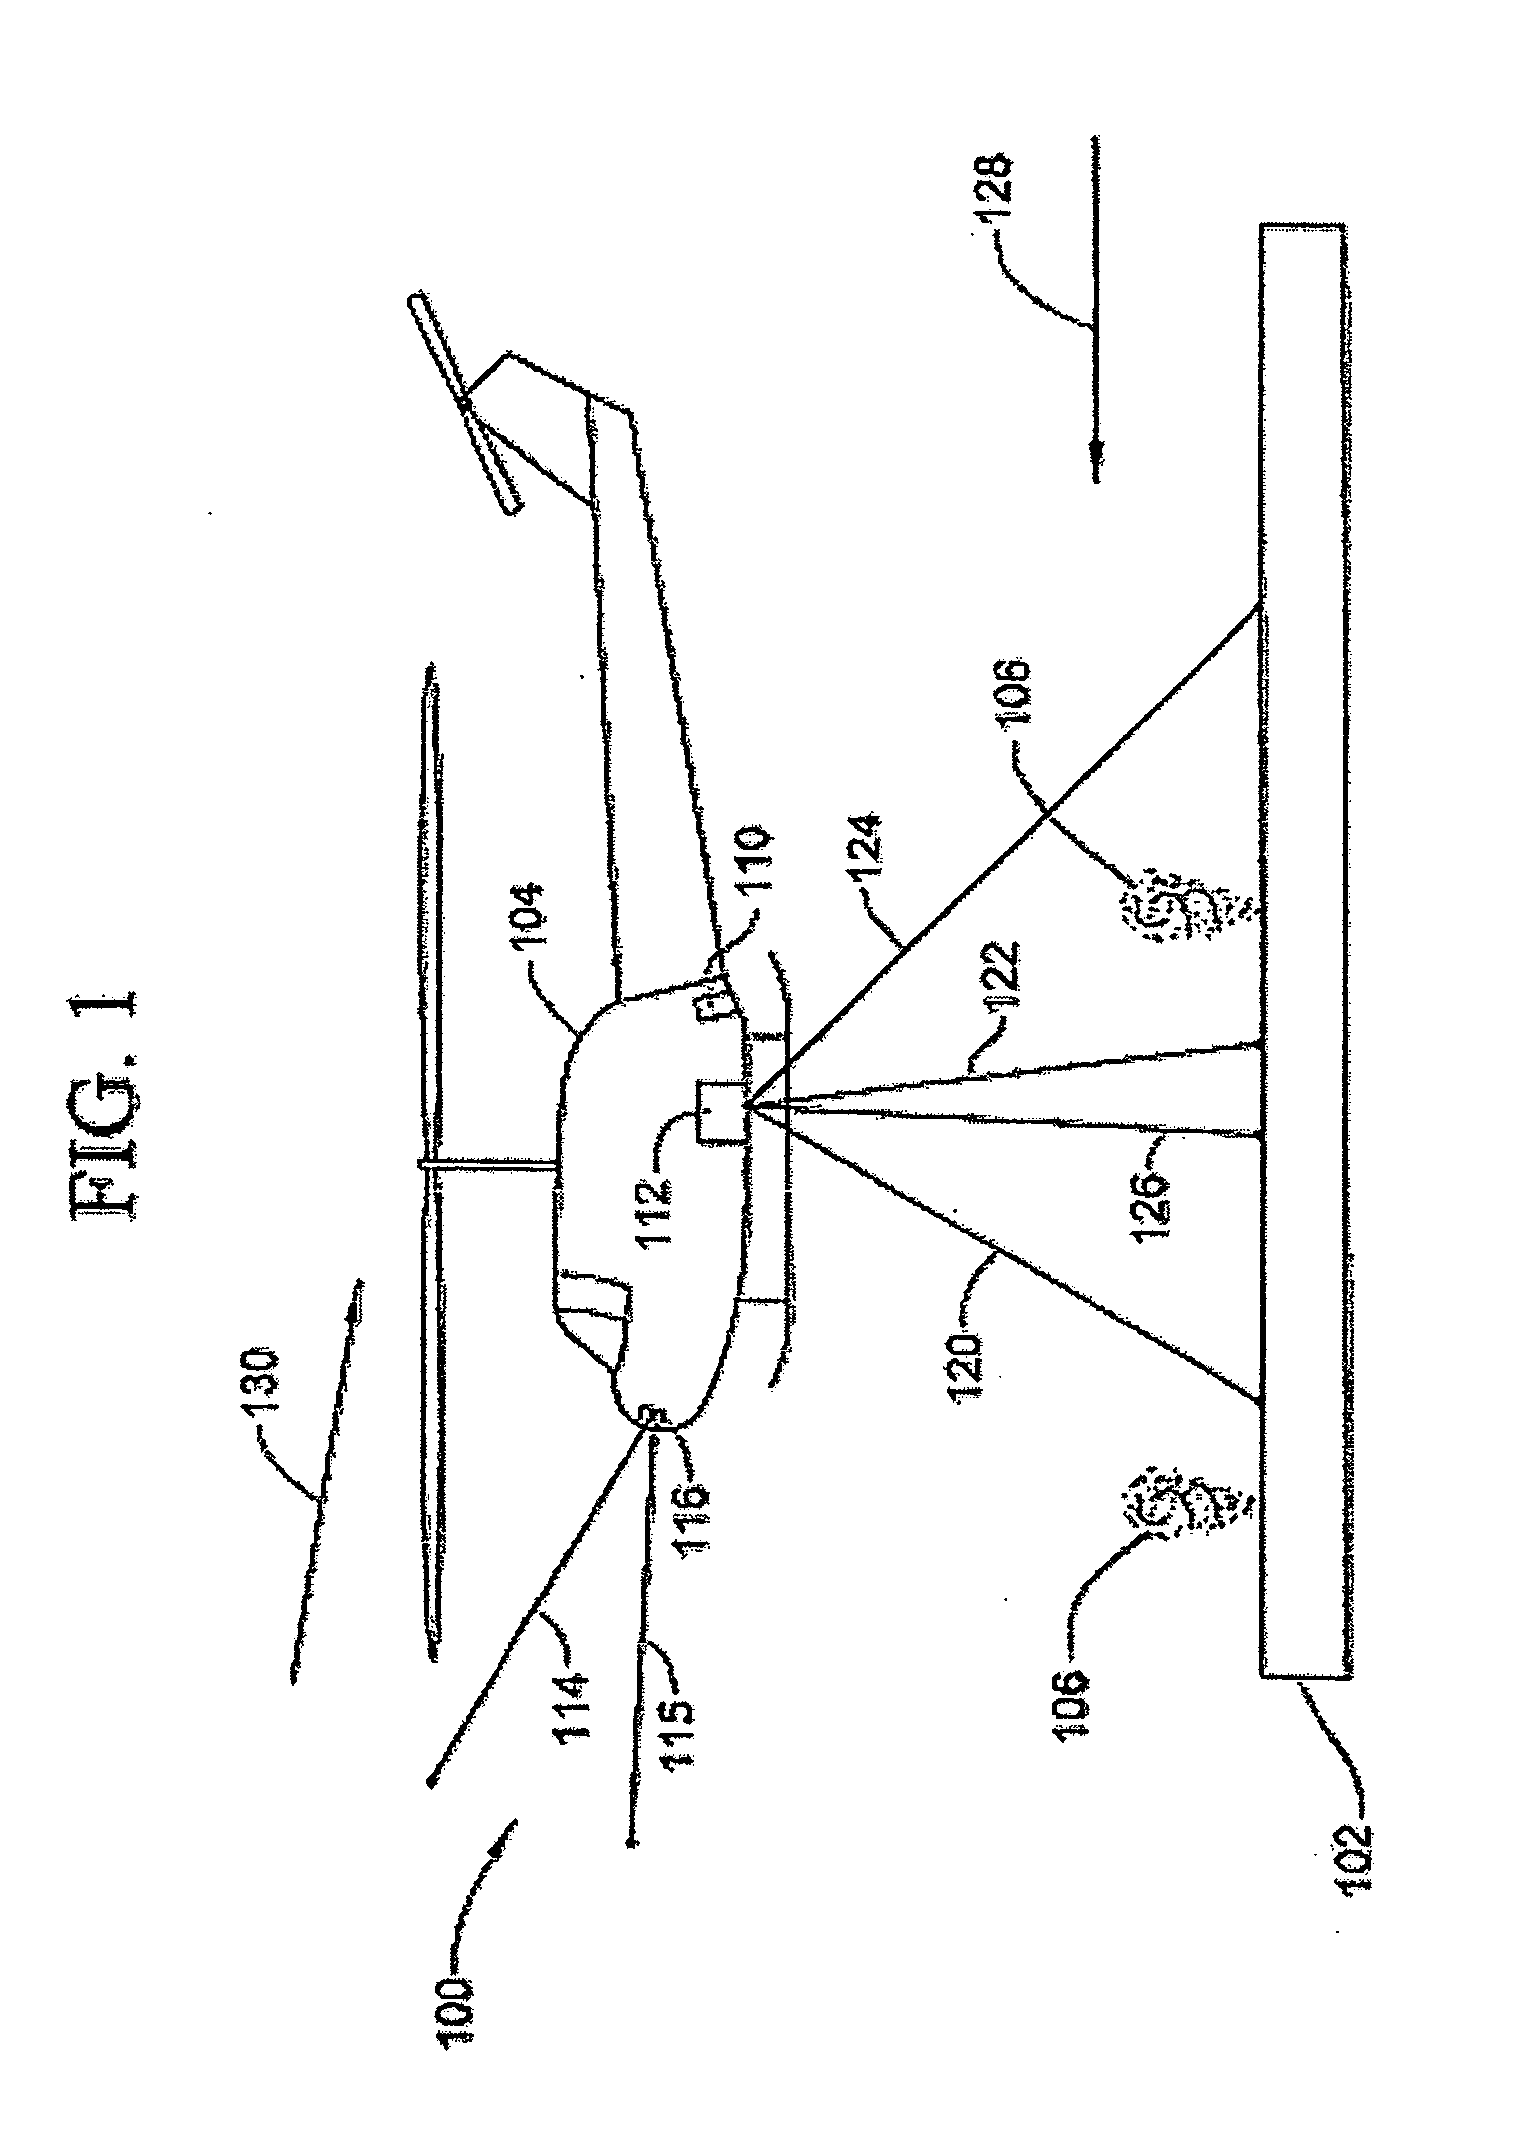 Optical System for Detecting and Displaying Aircraft Position and Environment During Landing and Takeoff